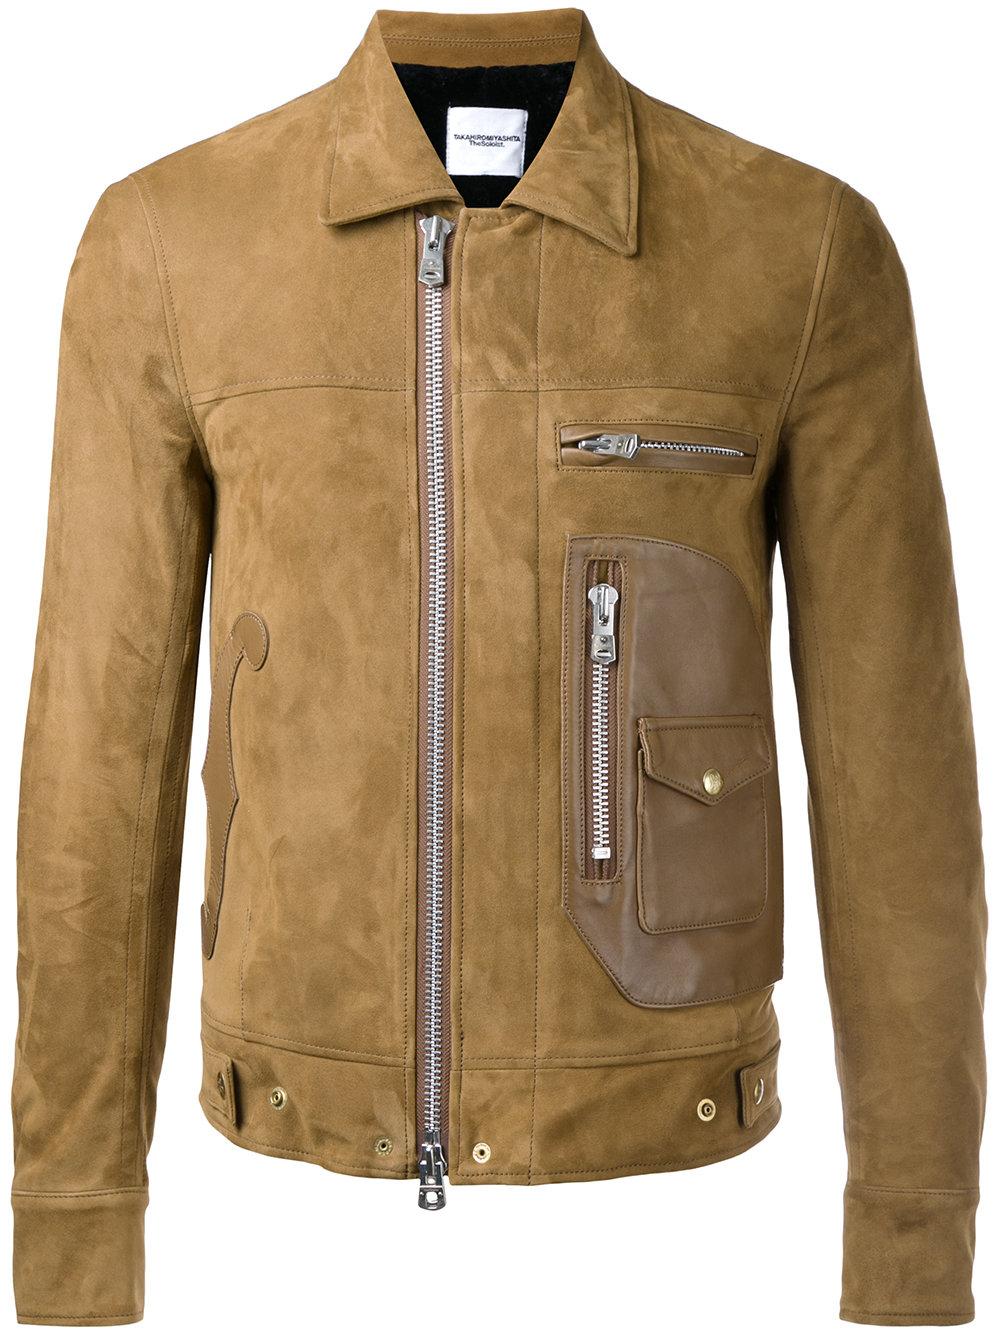 Top 15 Leather Jacket Brands for Men- Reviews, Prices & More